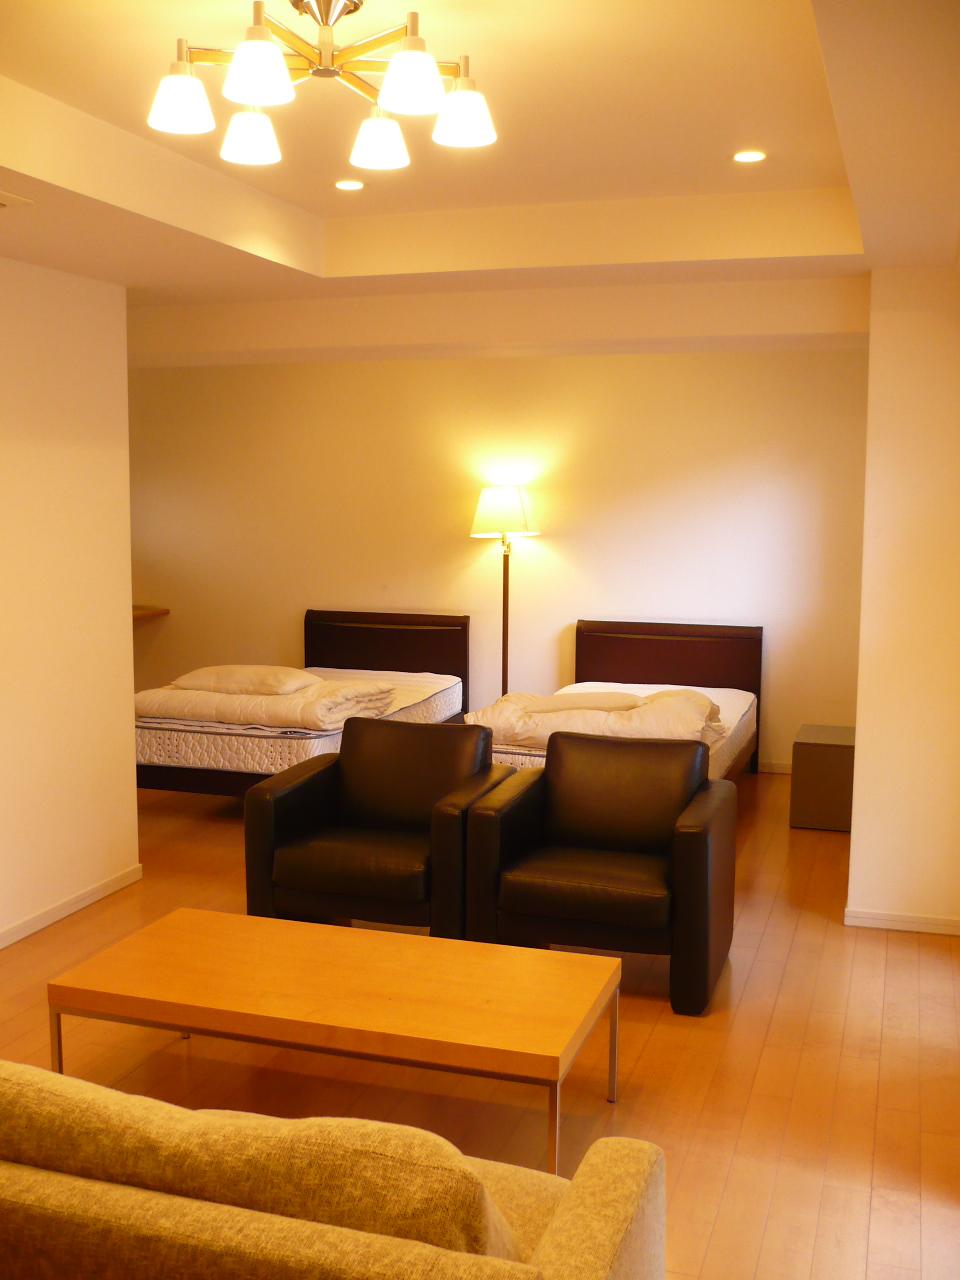 Other common areas. Guest rooms